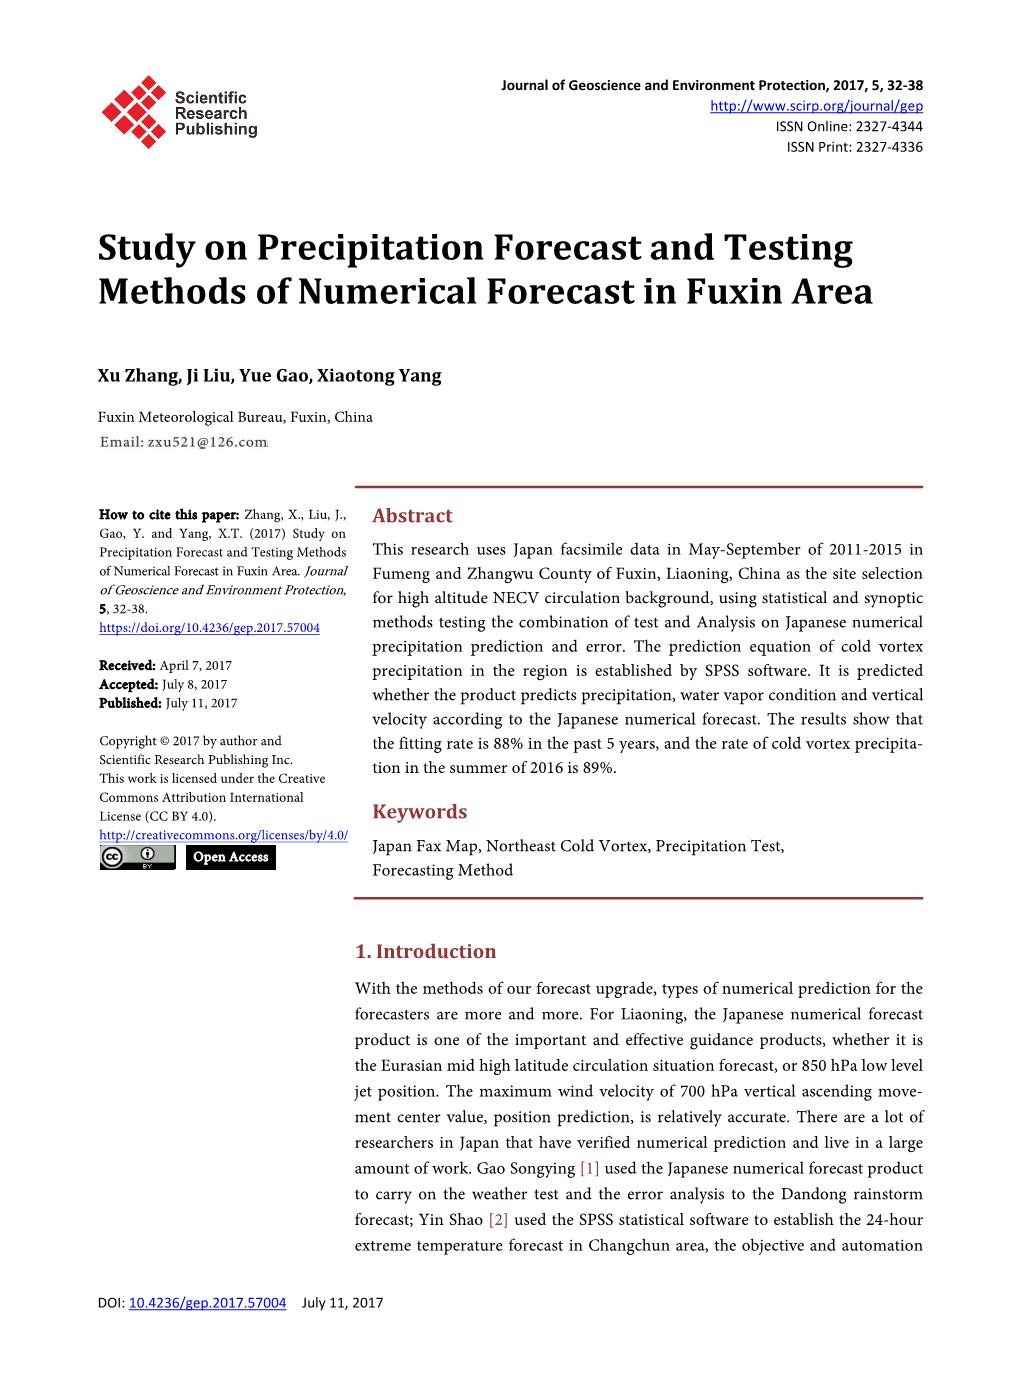 Study on Precipitation Forecast and Testing Methods of Numerical Forecast in Fuxin Area